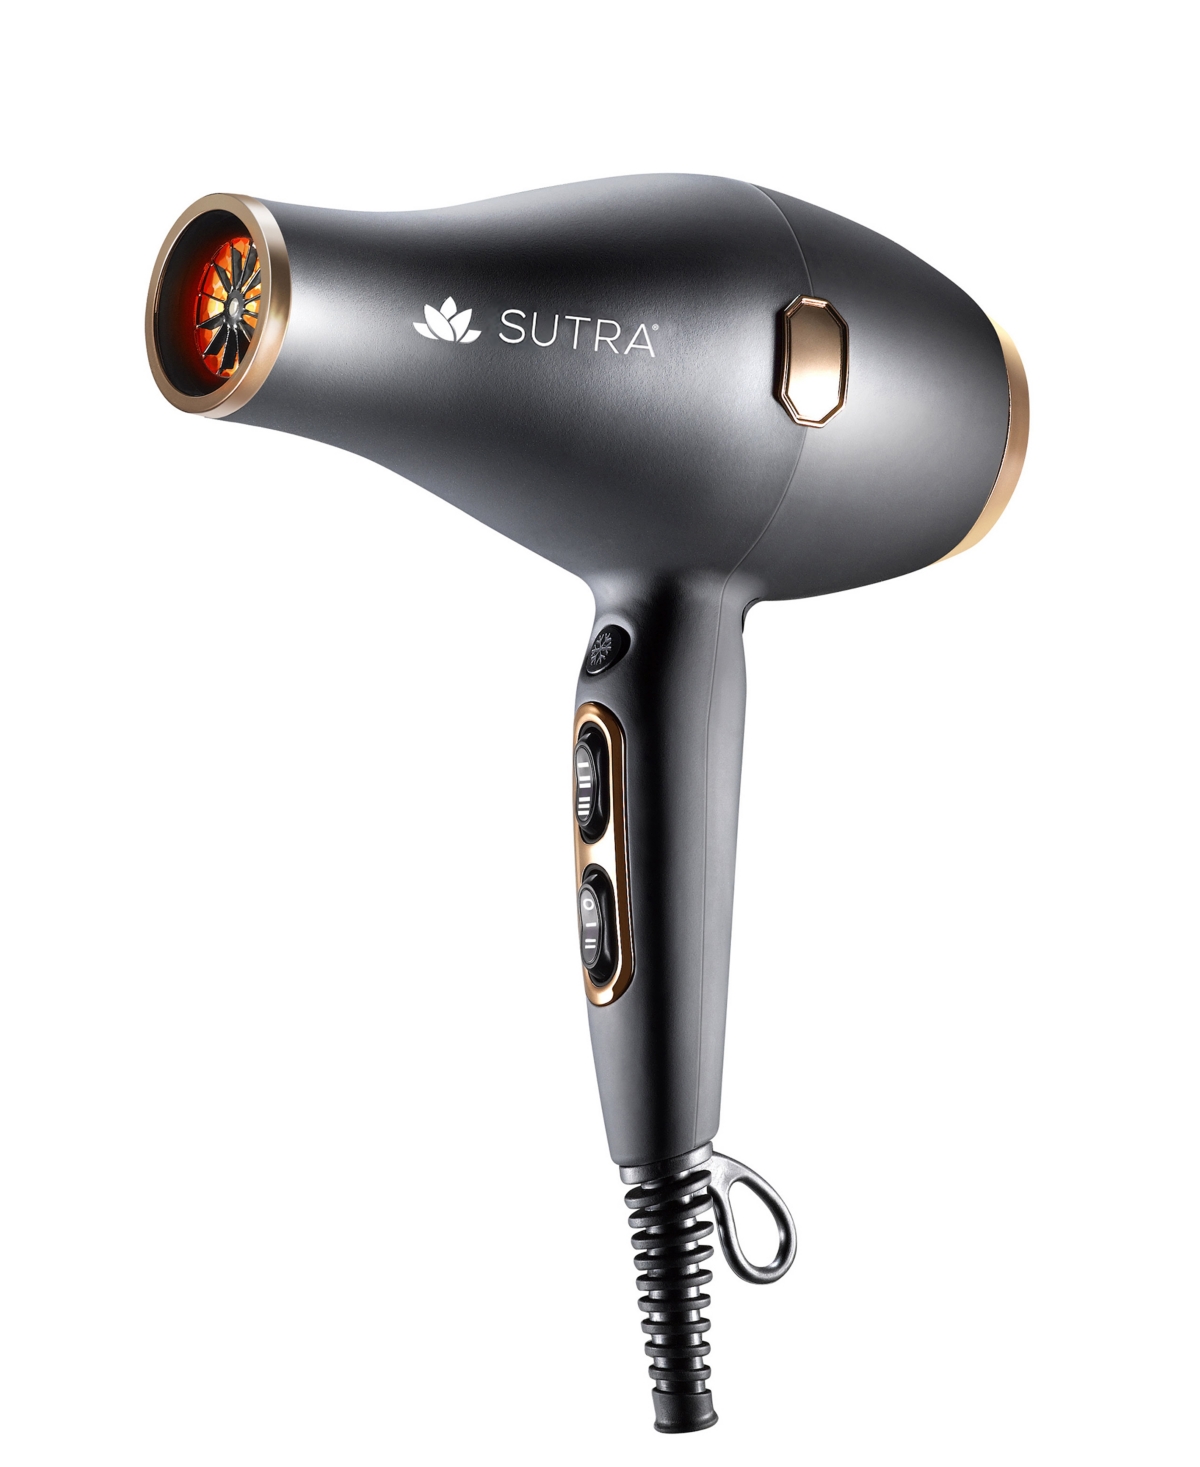 BD2 Infrared Blow Dryer with Far Infrared Technology - Black